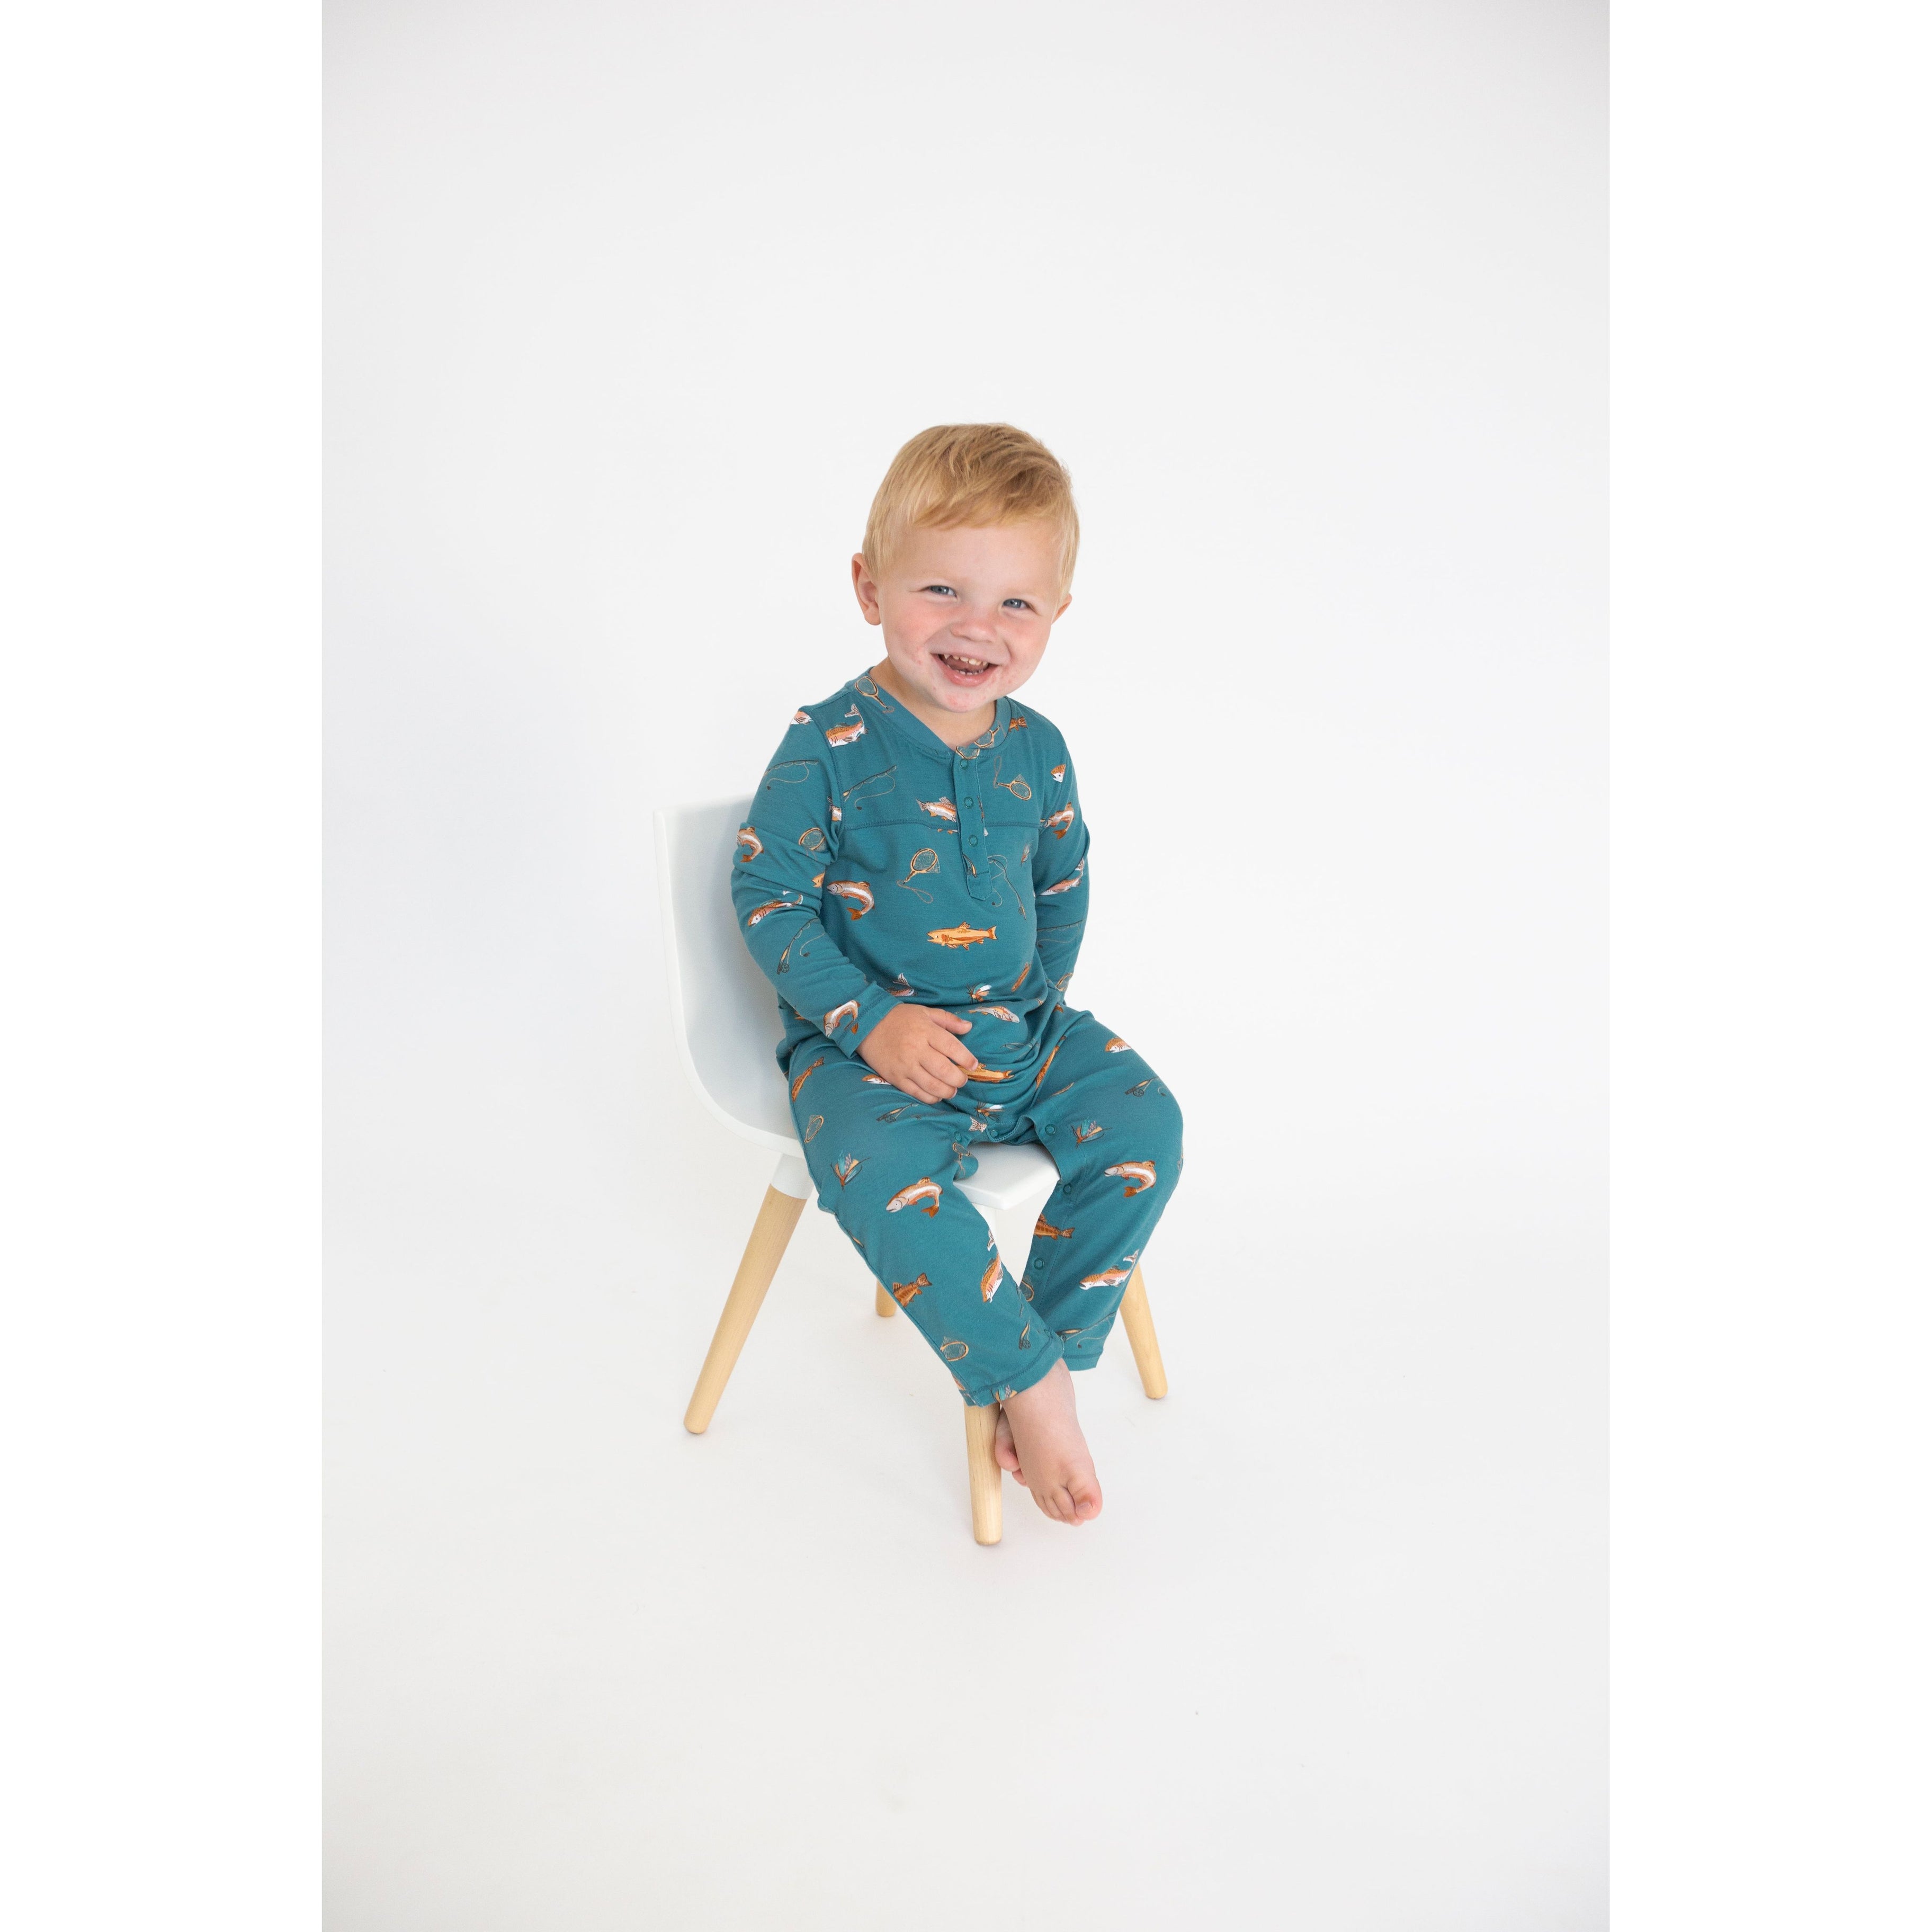 toddler boy wearing teal long sleeve romper with pockets and 3 snaps with brown trout print